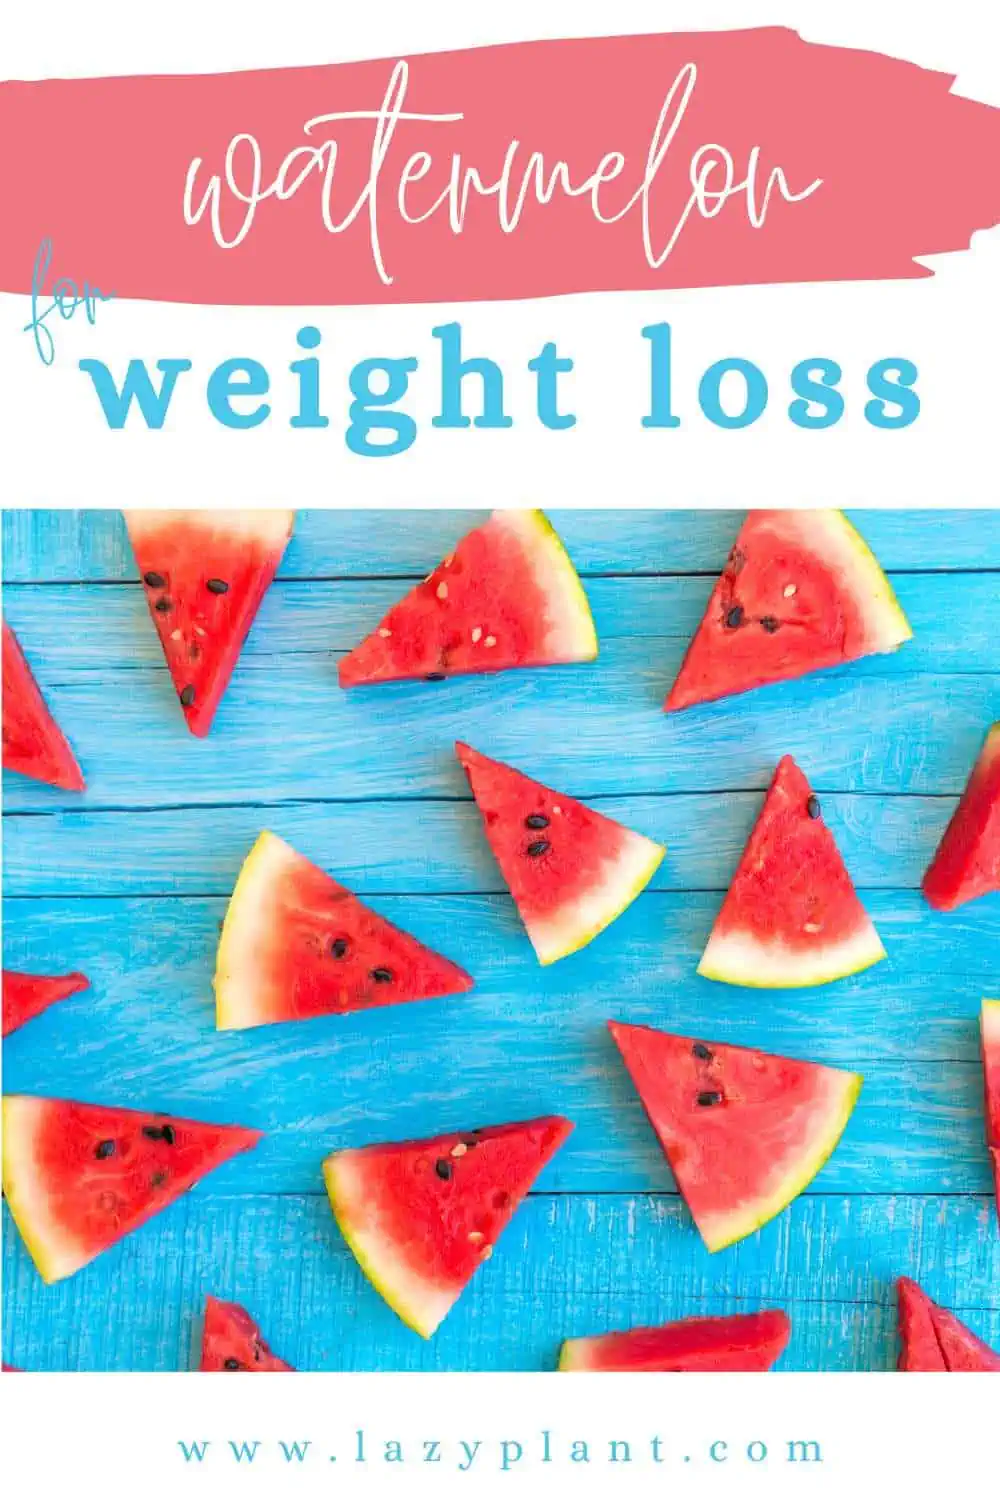 Watermelon is good for weight loss, as it has only a few calories.